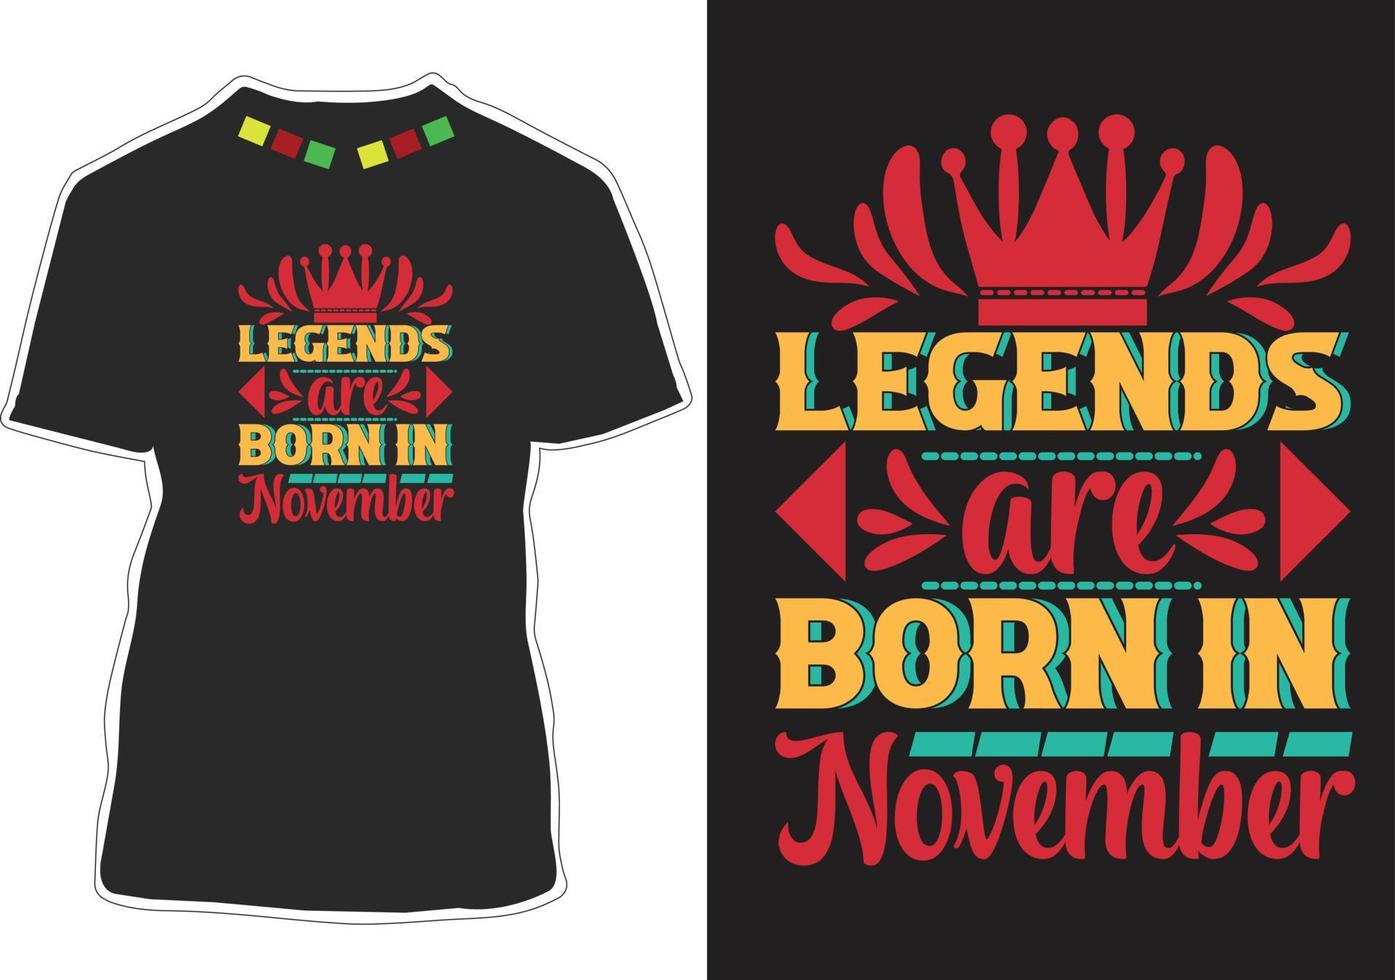 Legends are born in November Motivational quotes t-shirt design vector